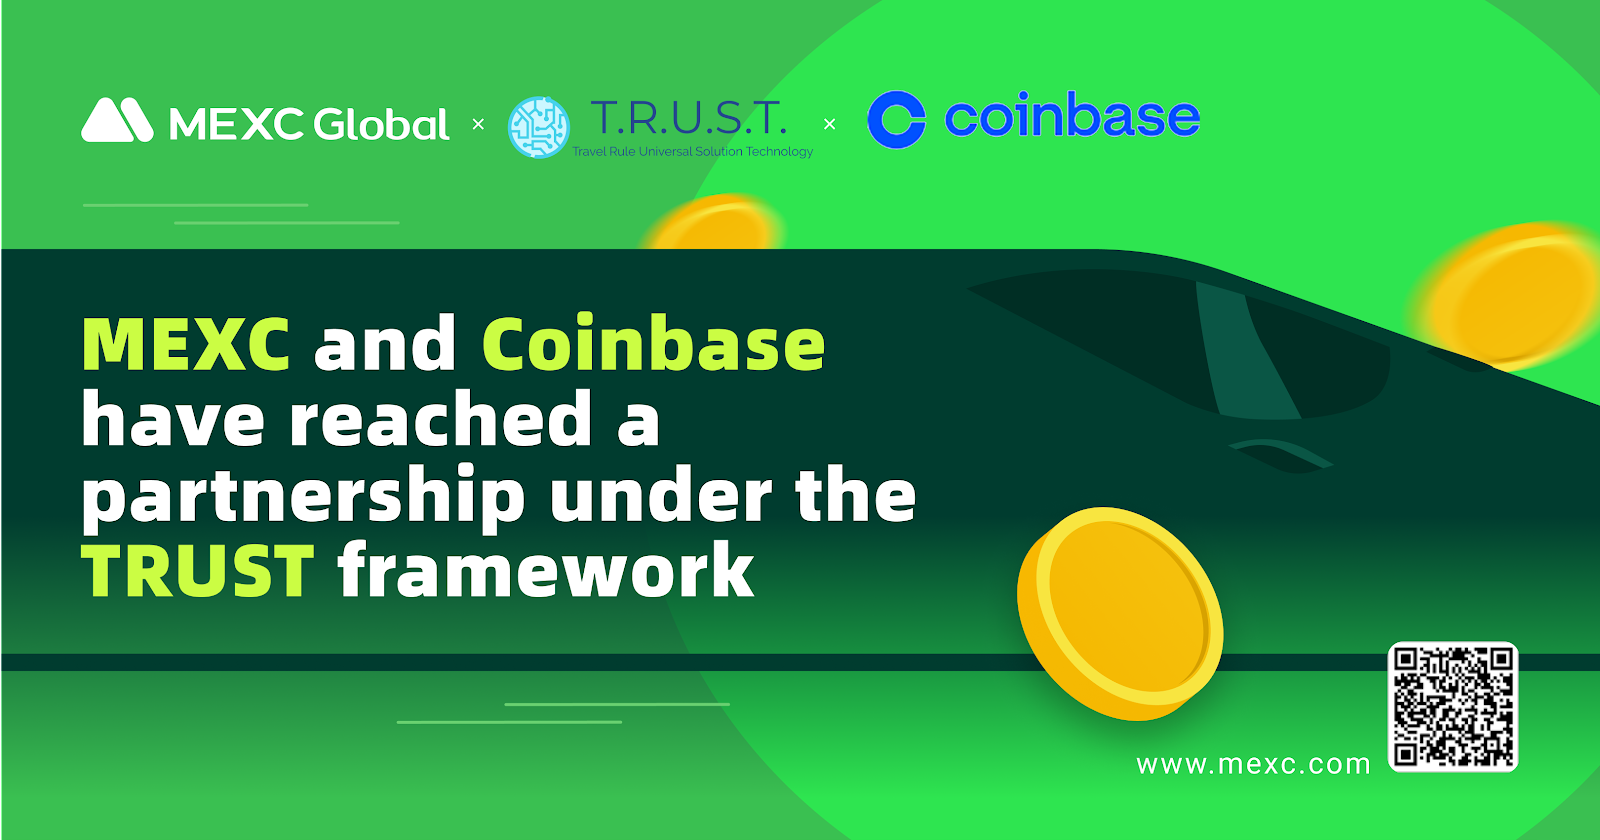 MEXC and Coinbase Reach Partnership to Jointly Fulfil the Privacy and Security Obligations of Cryptocurrency Under the TRUST Framework – Press release Bitcoin News